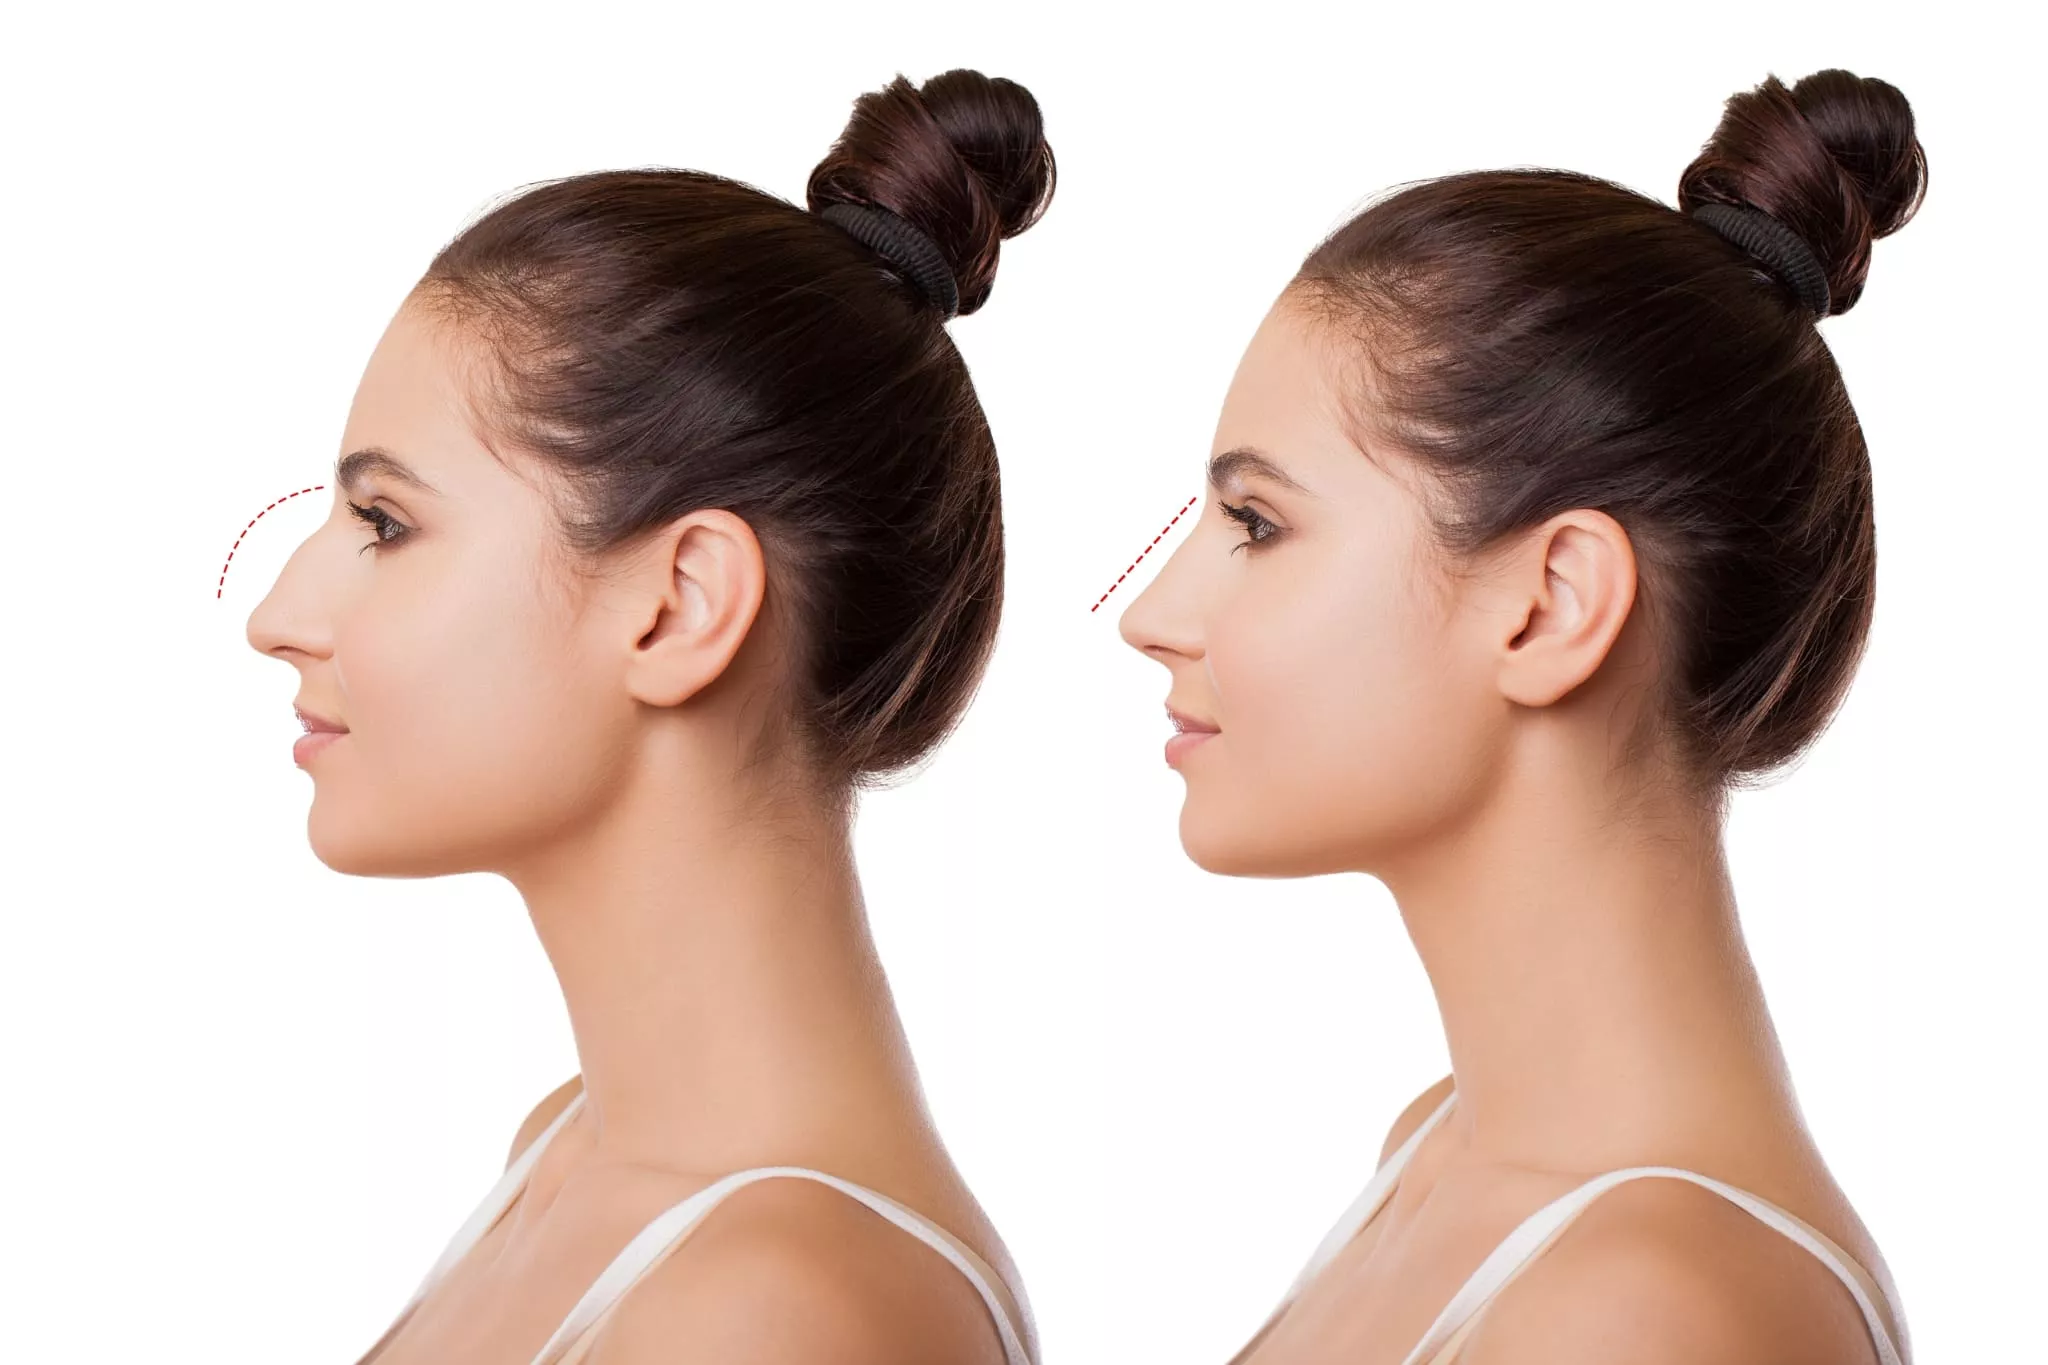 What Should Be Known About Rhinoplasty?